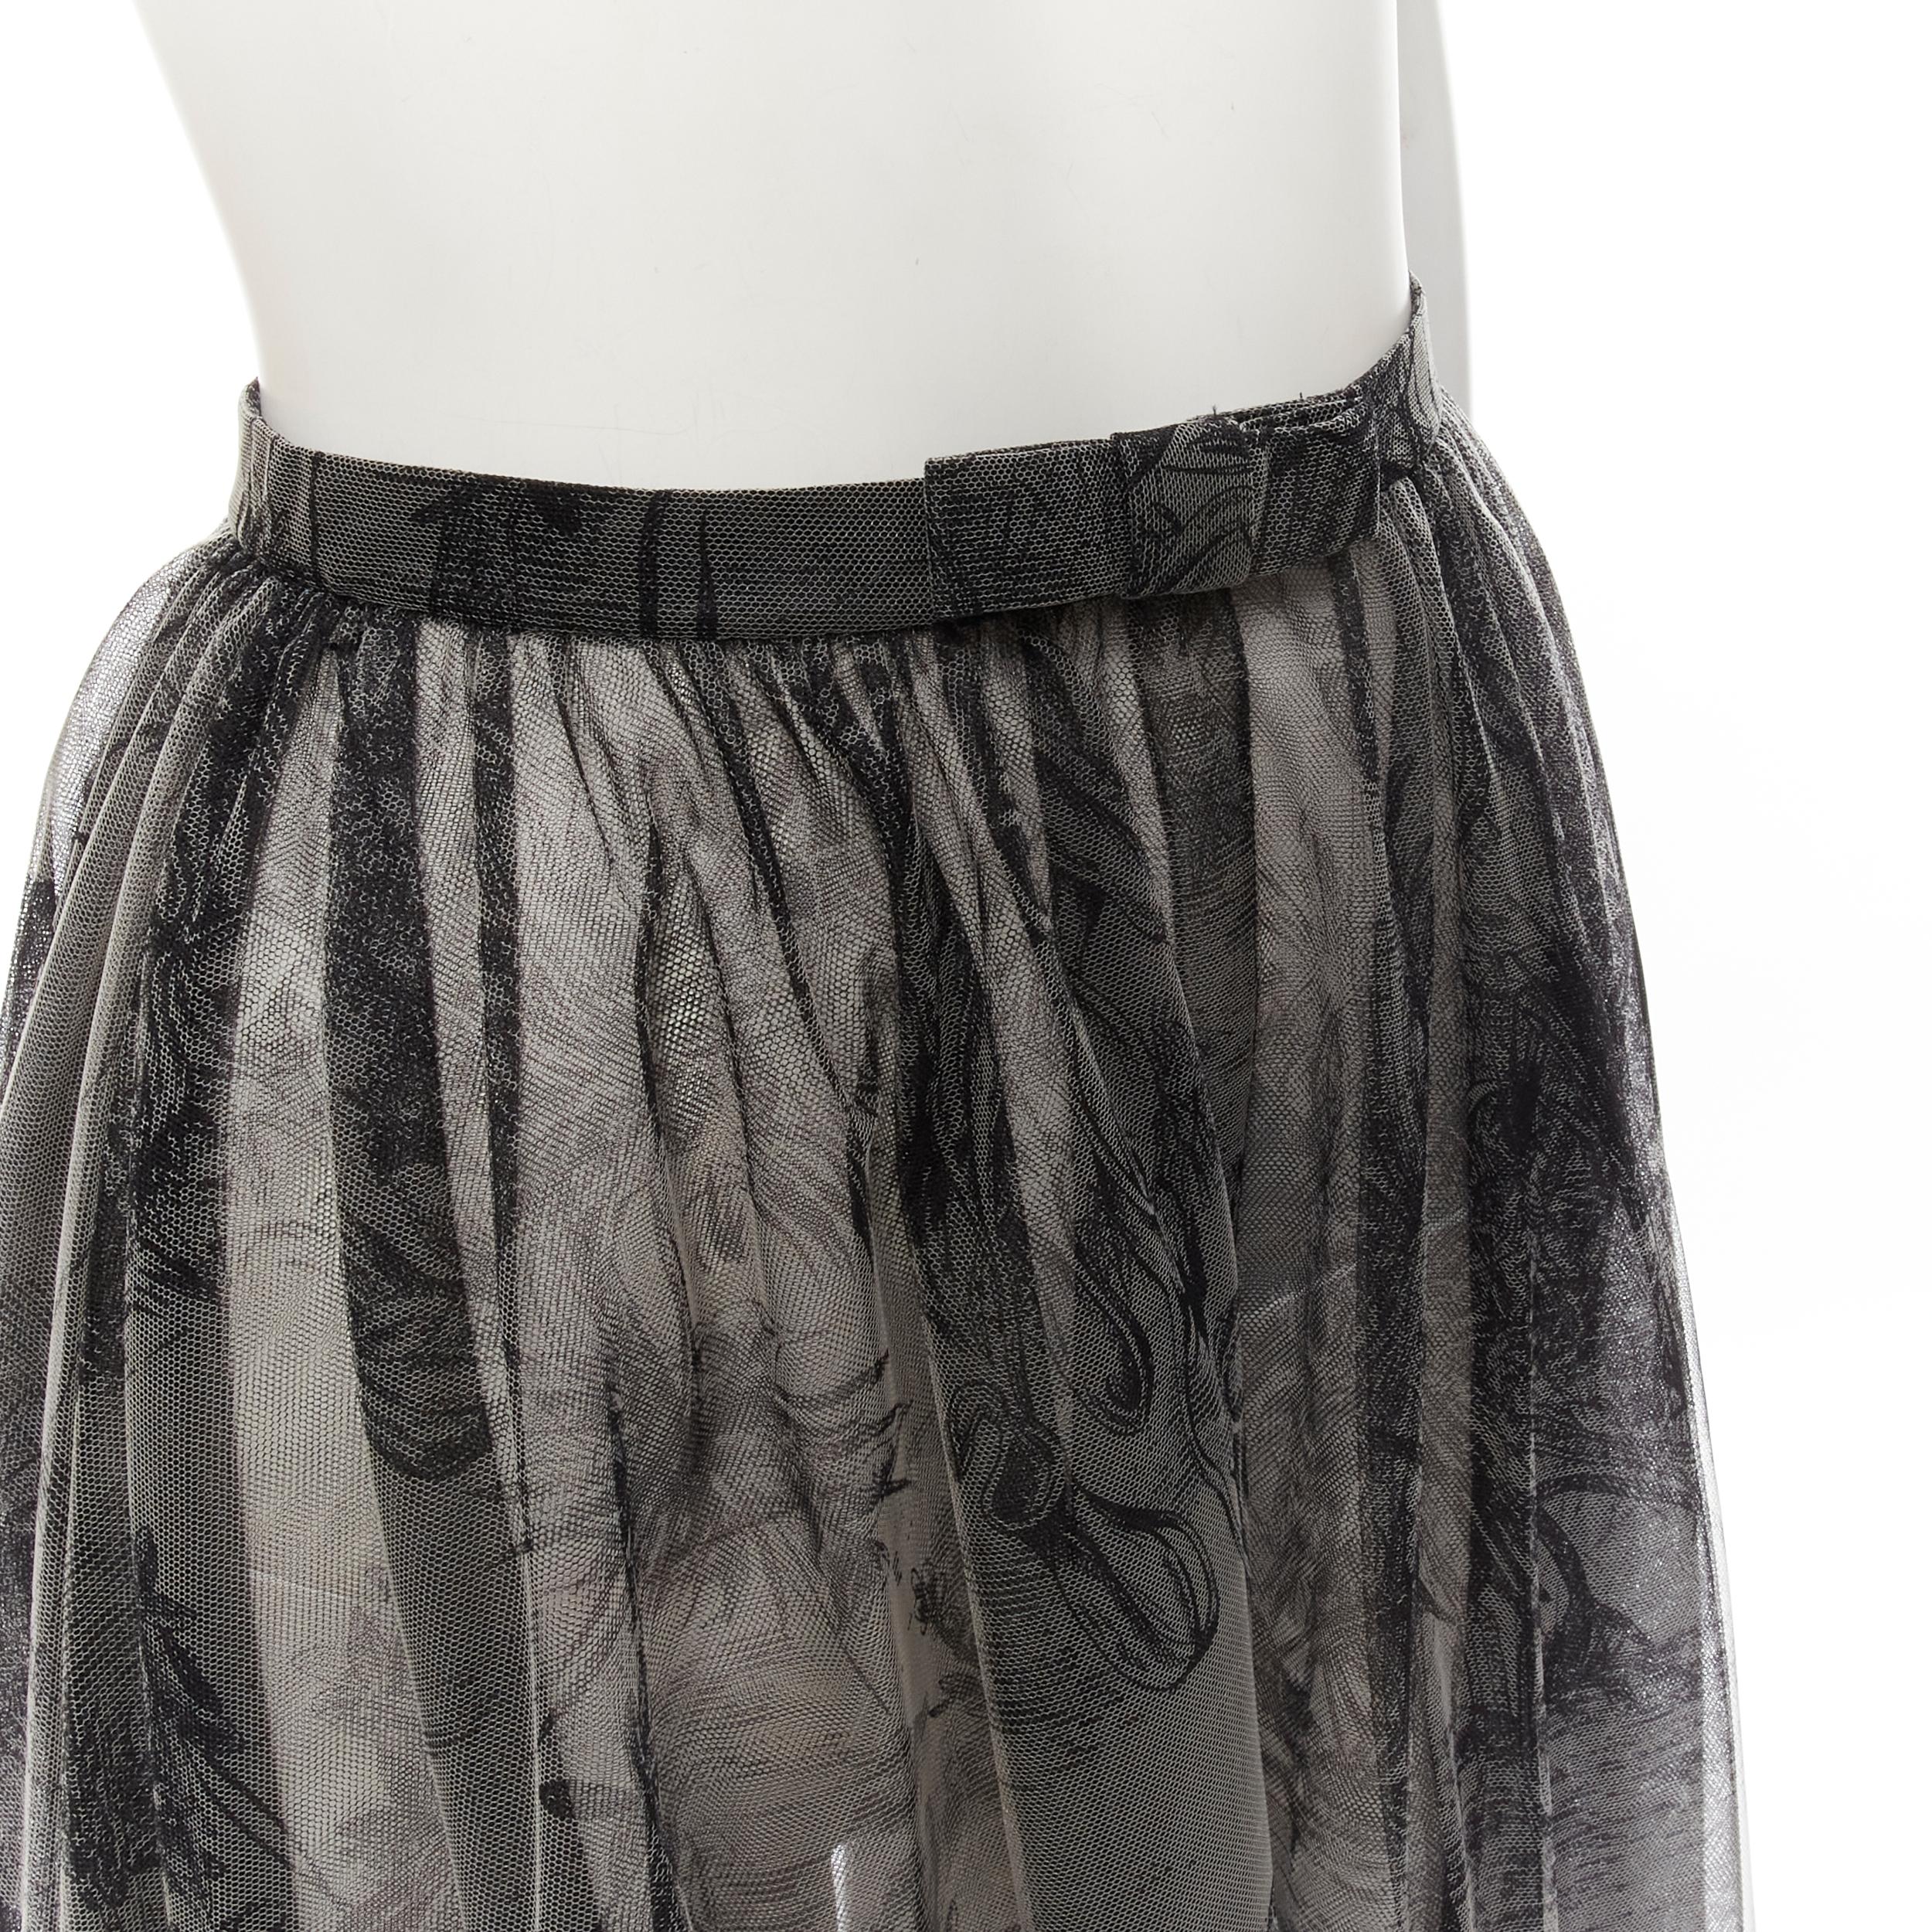 new CHRISTIAN DIOR Fantaisie sheer tulle bow waist open front slit skirt FR34 XS
Brand: Christian Dior
Designer: Maria Grazia Chiuri
Collection: Fantaisie 
Material: Polyamide
Color: Grey
Pattern: Graphic
Closure: Snap Buttons
Extra Detail: Bow